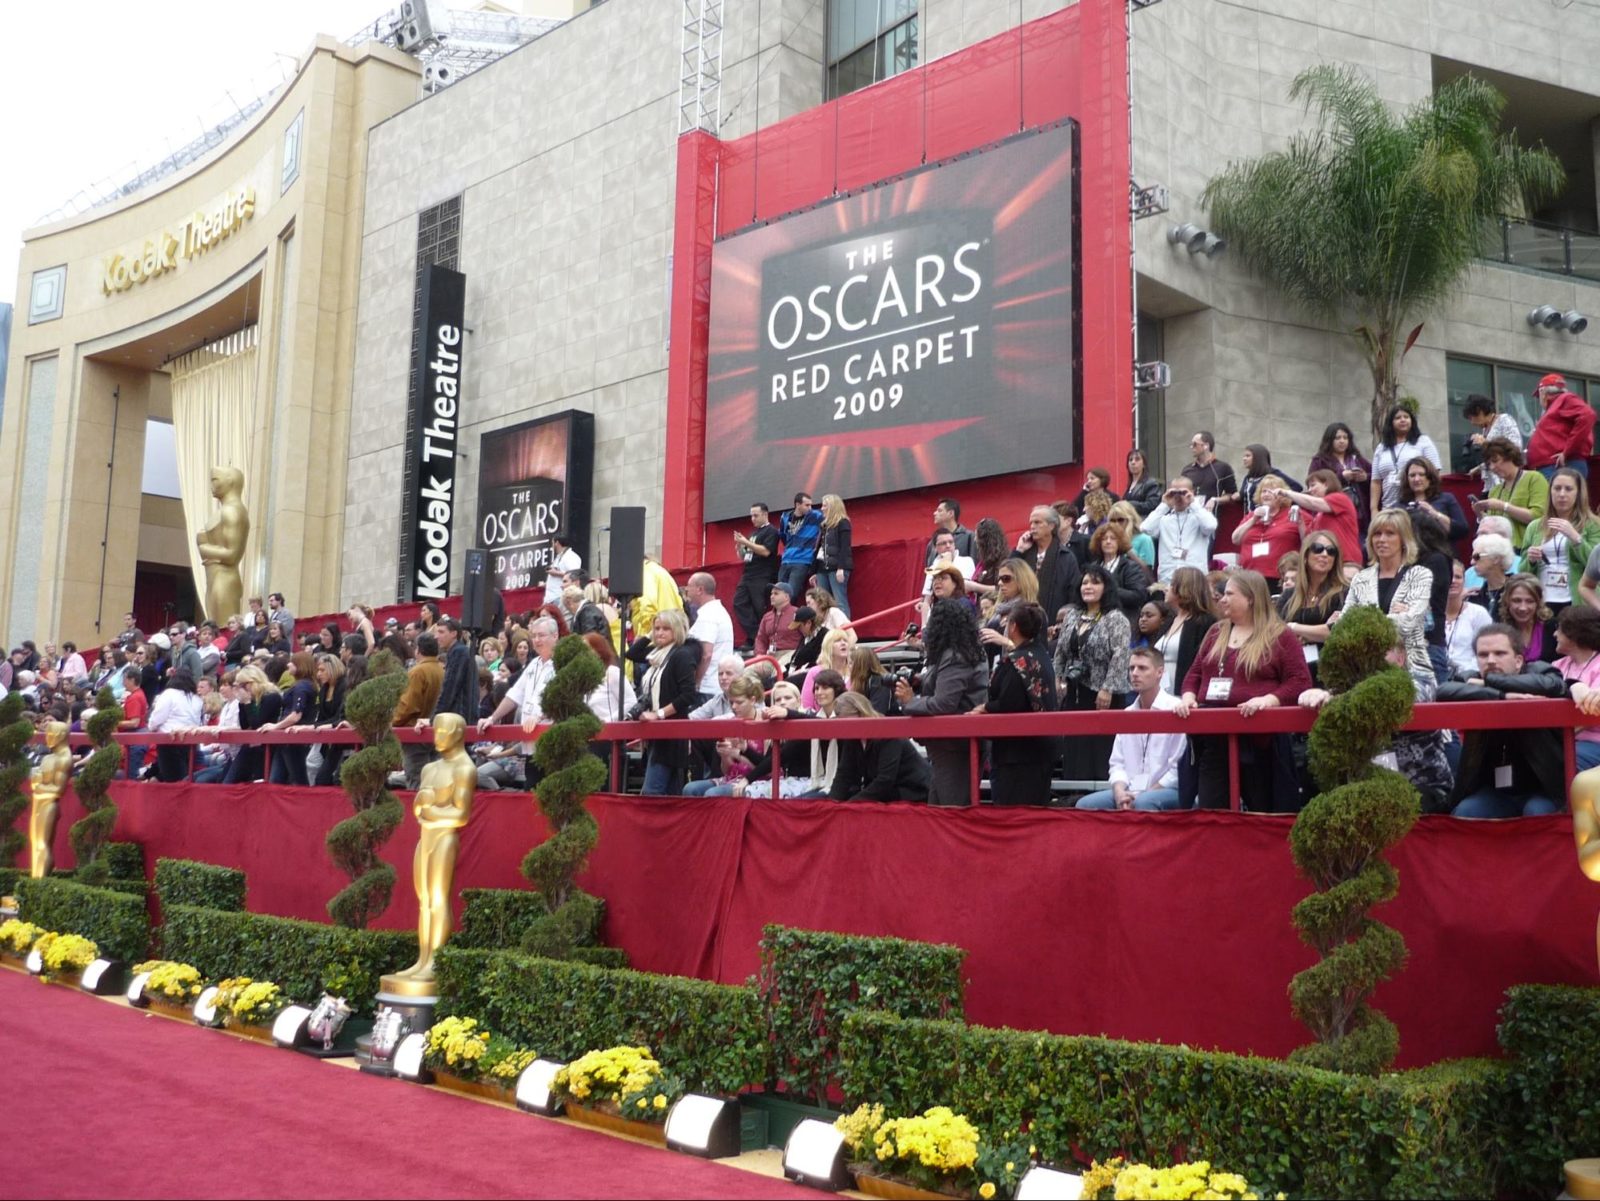 The Oscars Red Carpet 2009